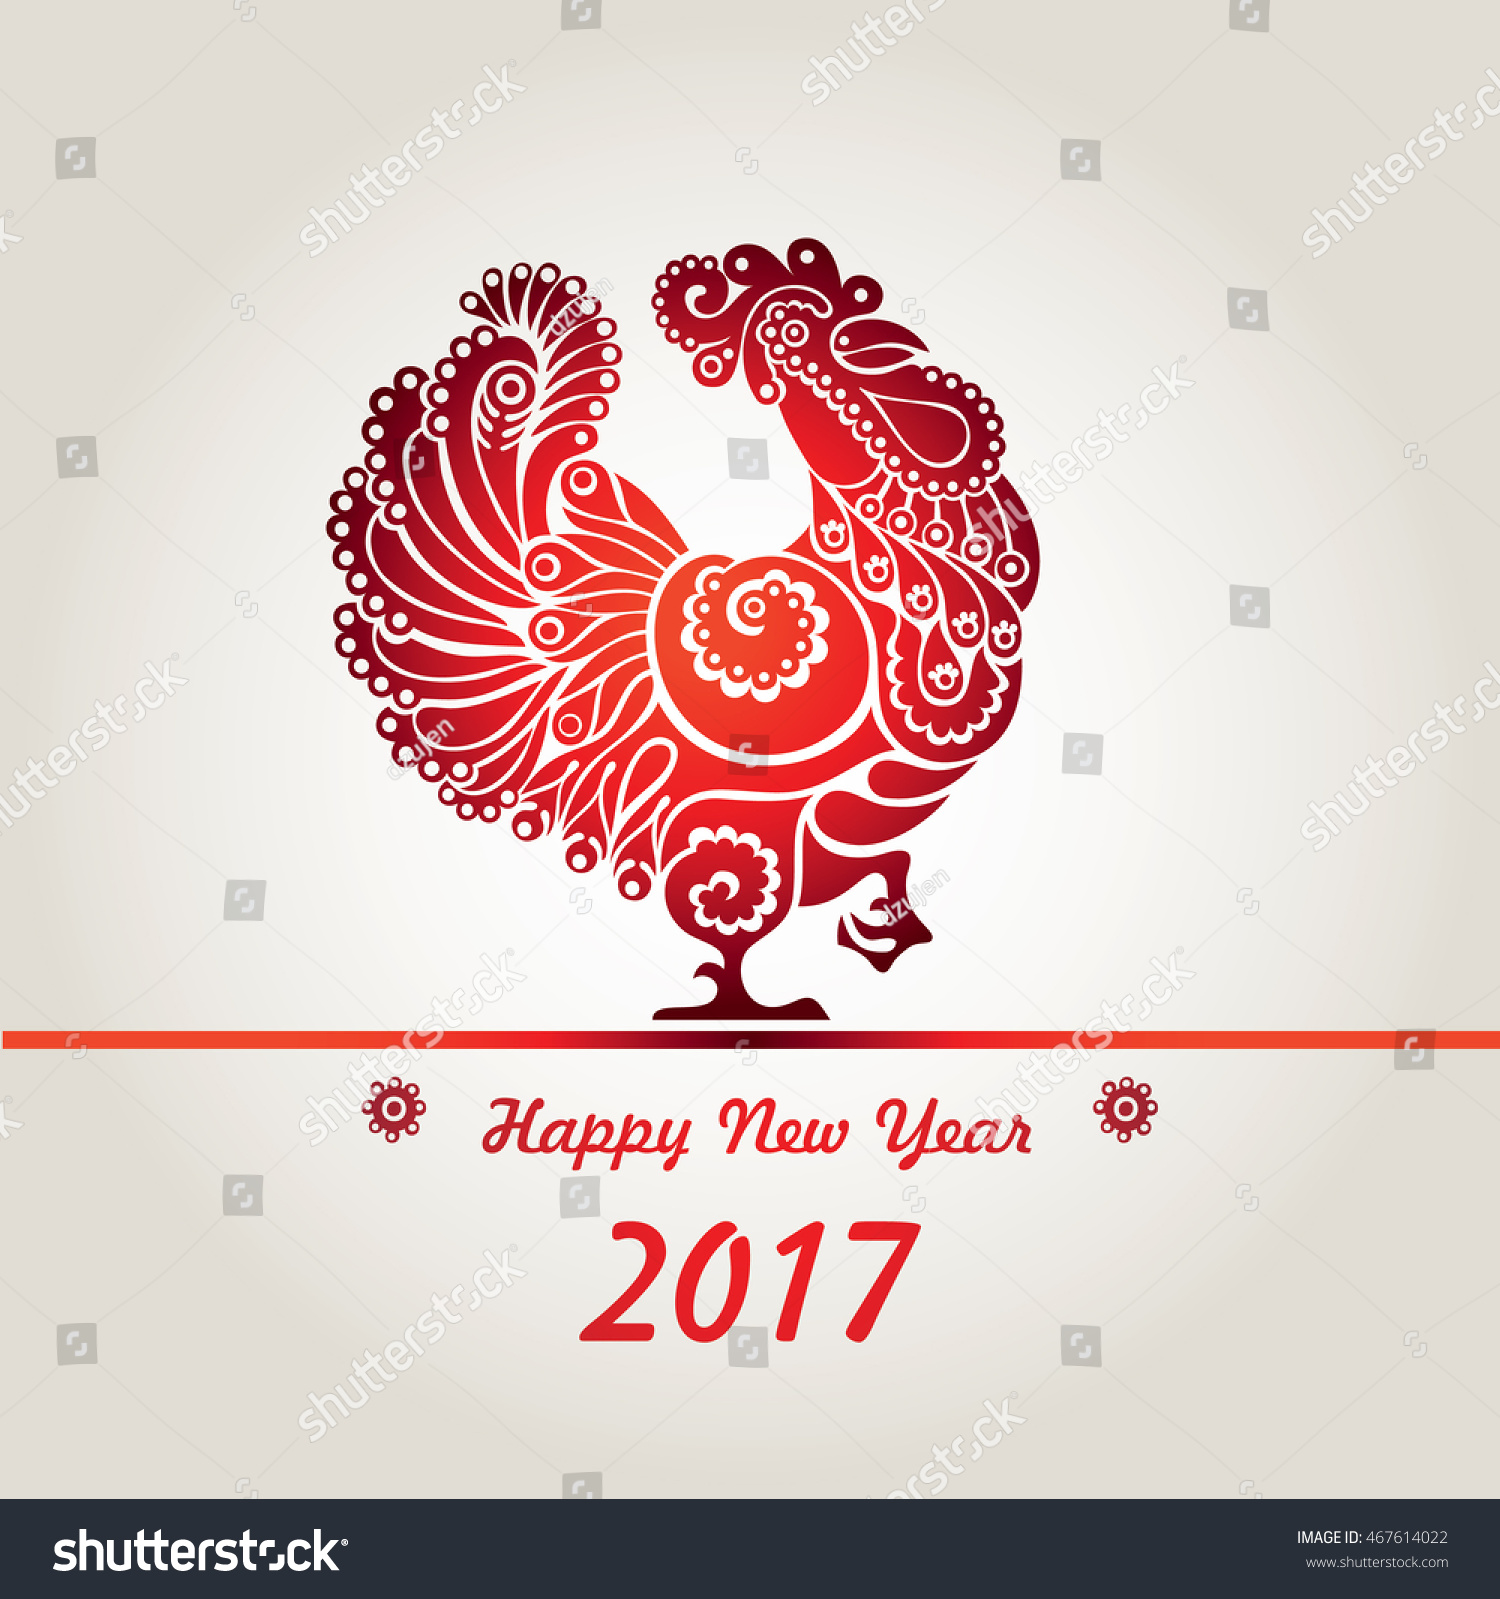 Happy new year 2017, year of rooster. #467614022